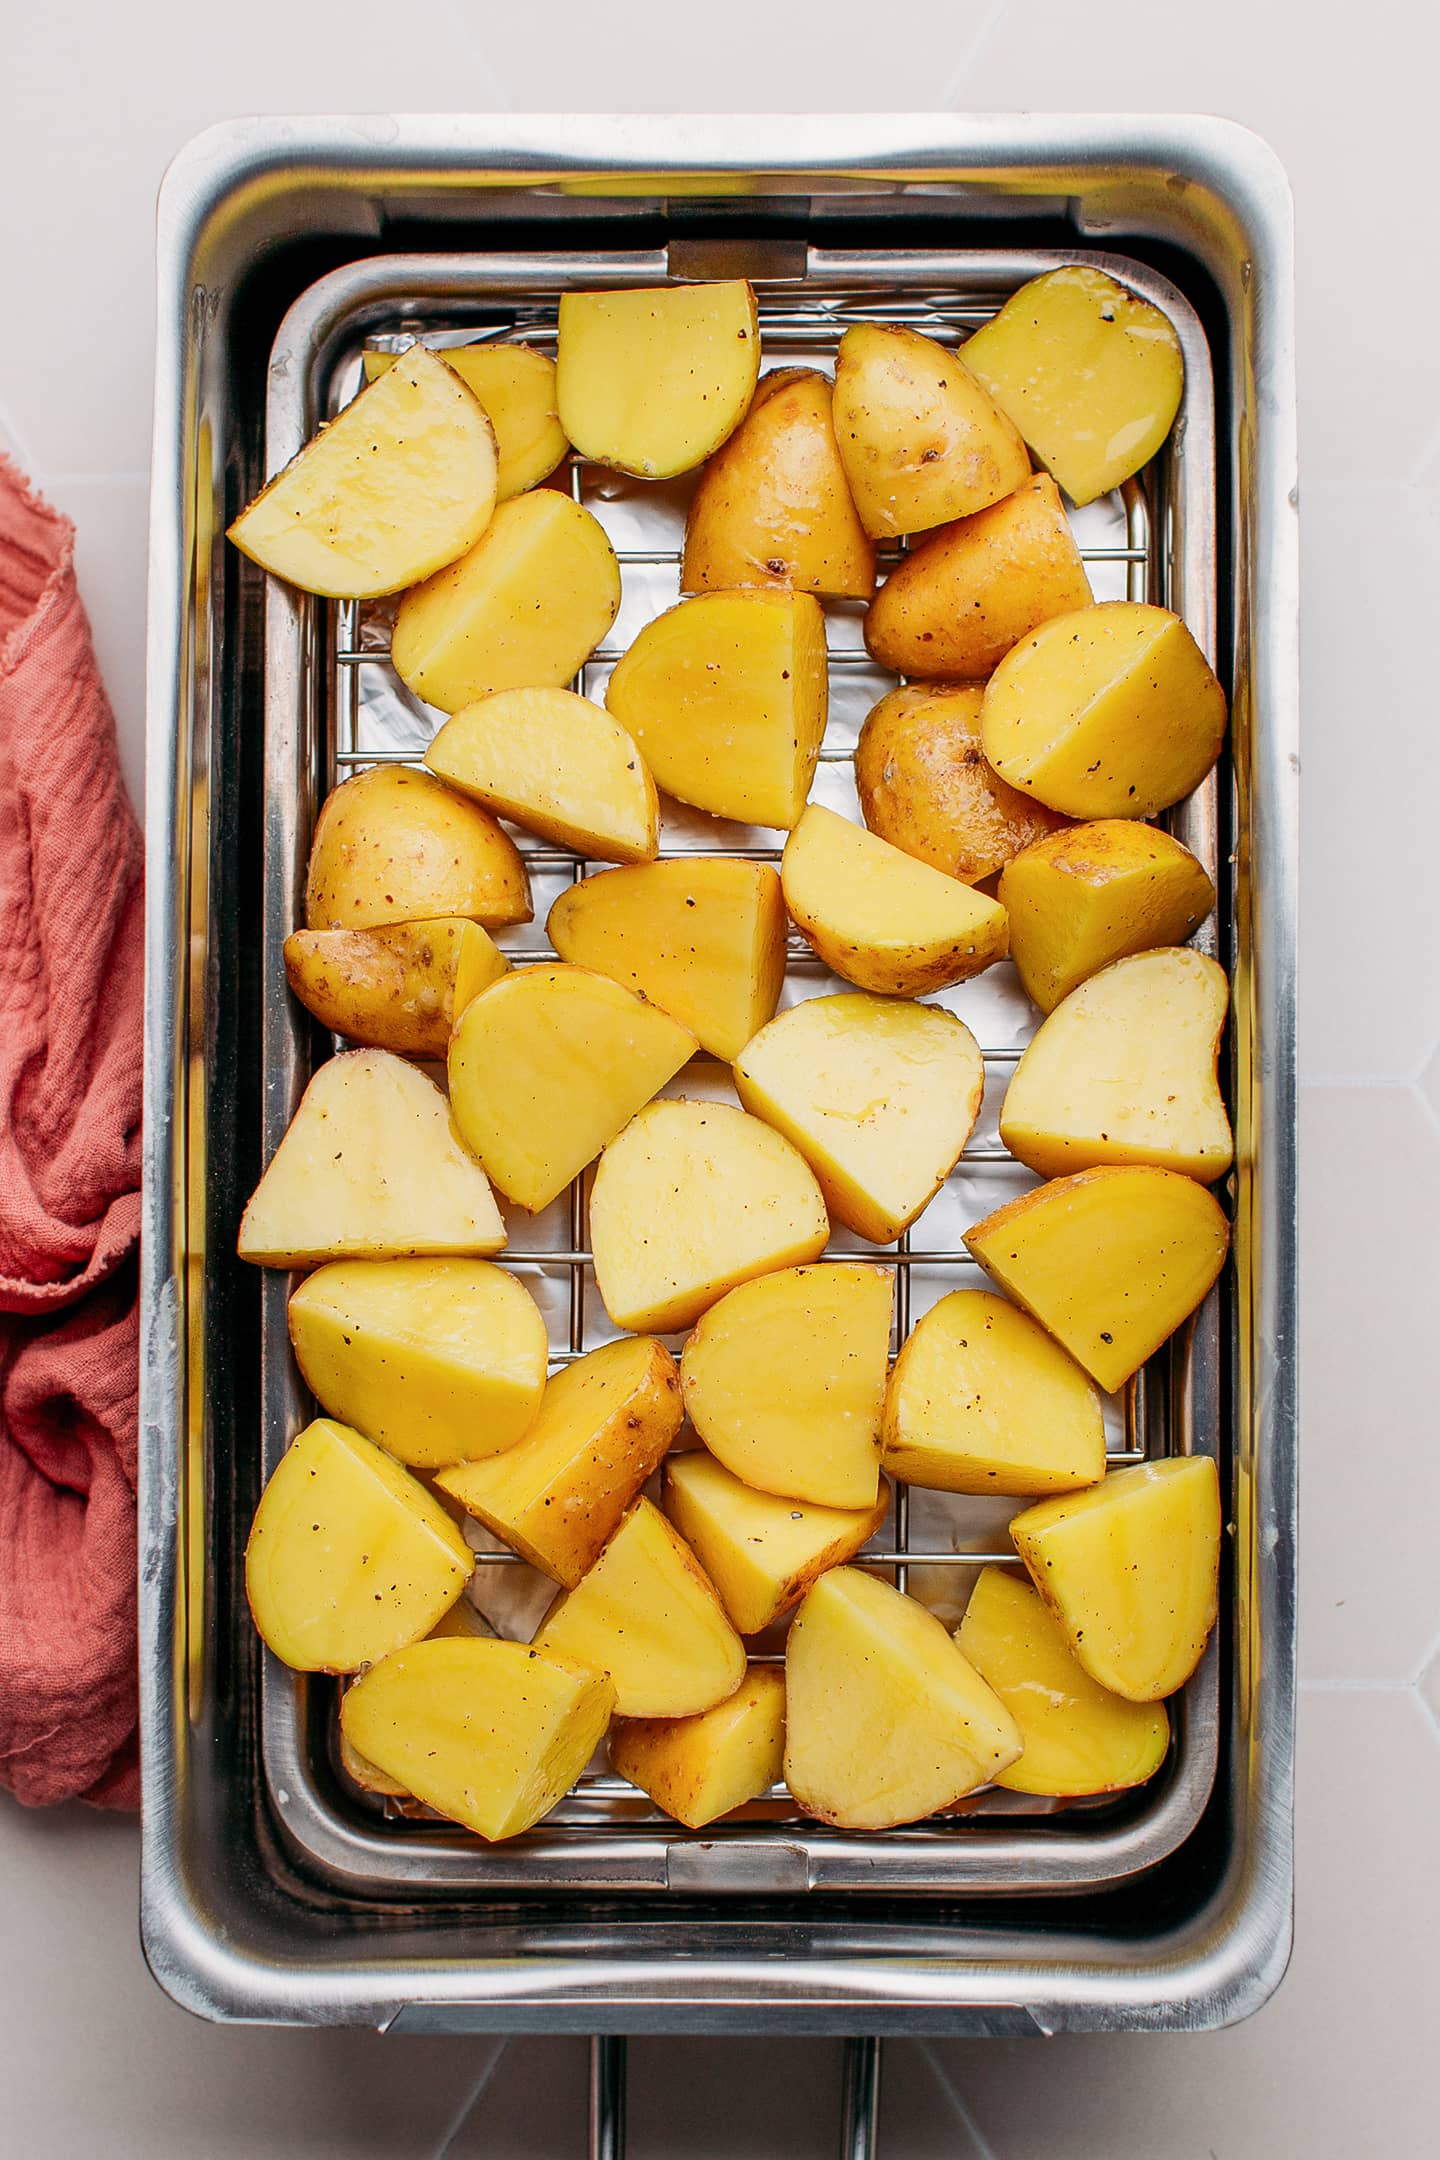 Quartered potatoes in a stovetop smoker.